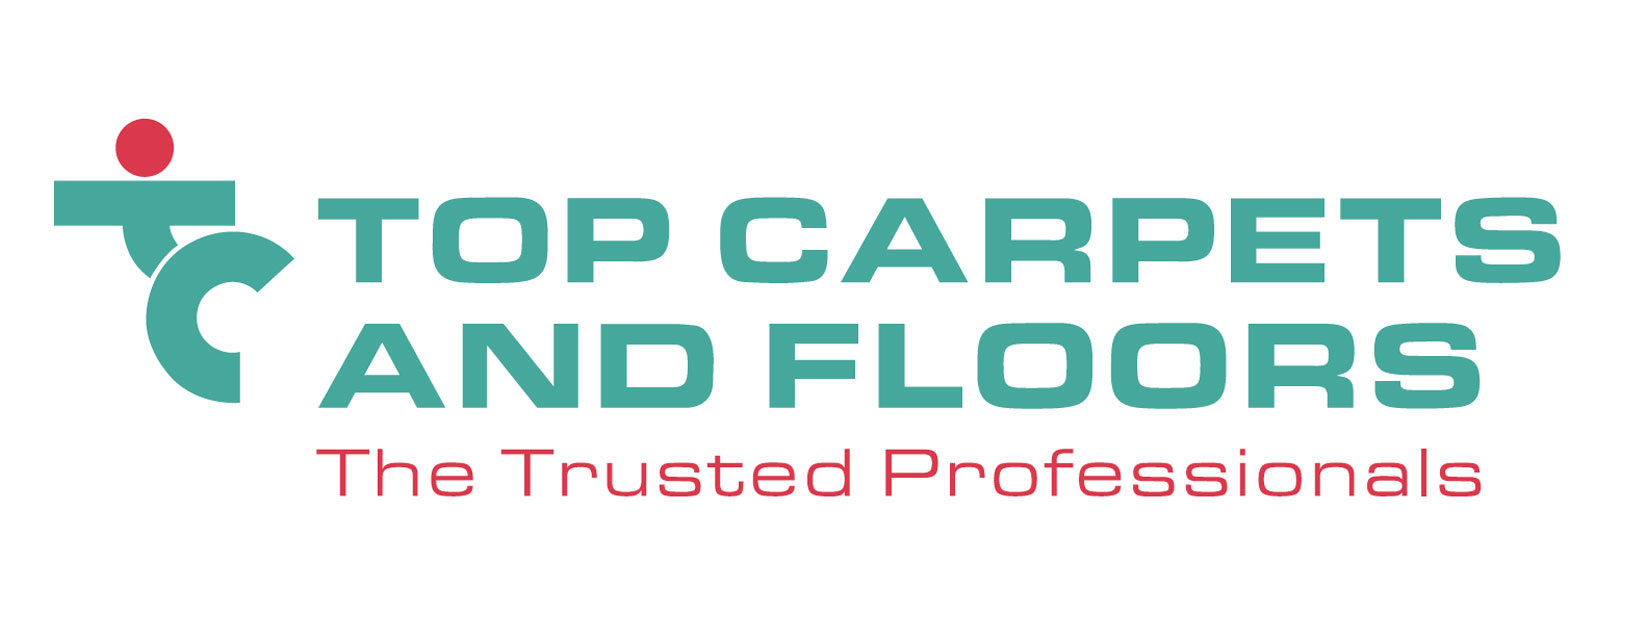 top carpet and floors logo somerset west - Cape Town